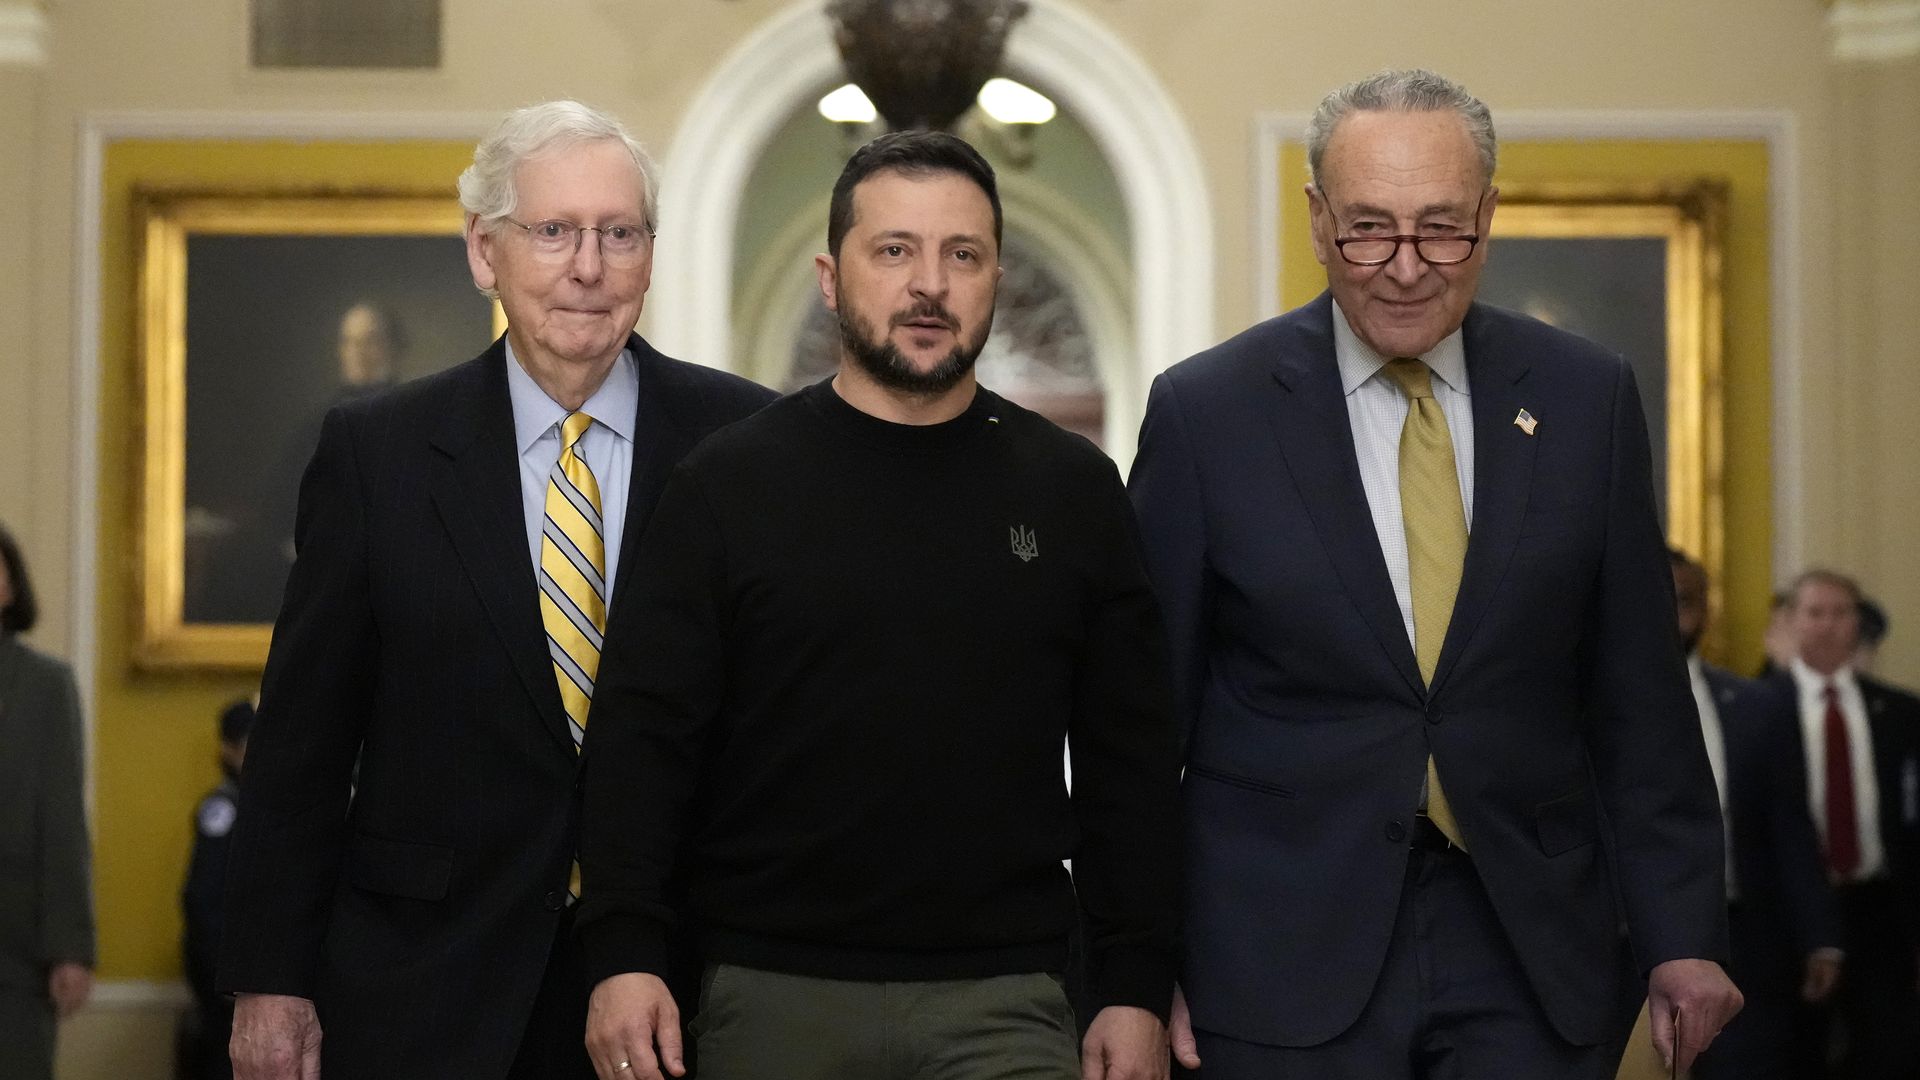 Ukrainian President Volodymyr Zelensky (C) walks with Senate Minority Leader Mitch McConnell (R-KY) (L) and Senate Majority Leader Charles Schumer (D-NY) as he arrives at the U.S. Capitol to meet with Congressional leadership 